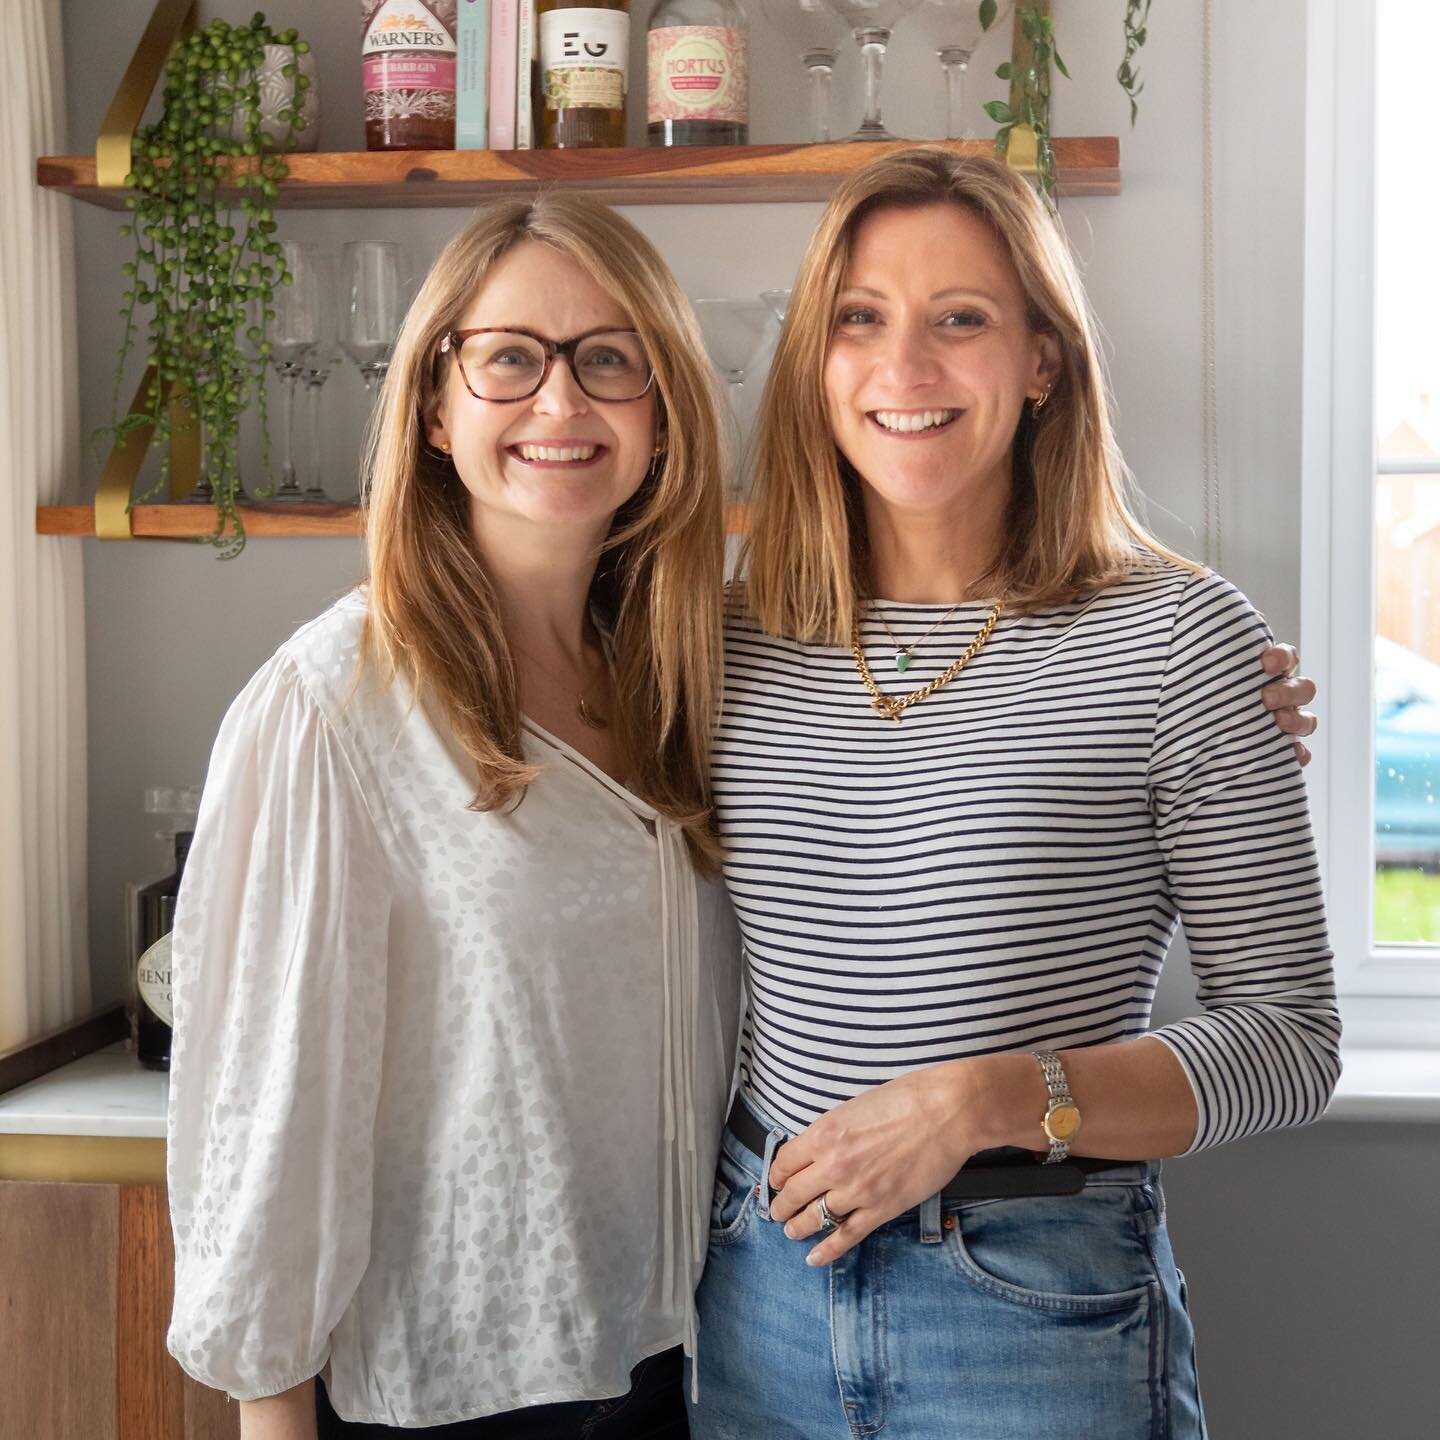 Happy Friday All! I thought I&rsquo;d share with you this recent shot from my @decorbuddi Kent project photoshoot of me and my lovely colleague Tracy. 

One of the best things about being part of @decorbuddi is the amazing team of people who are ther